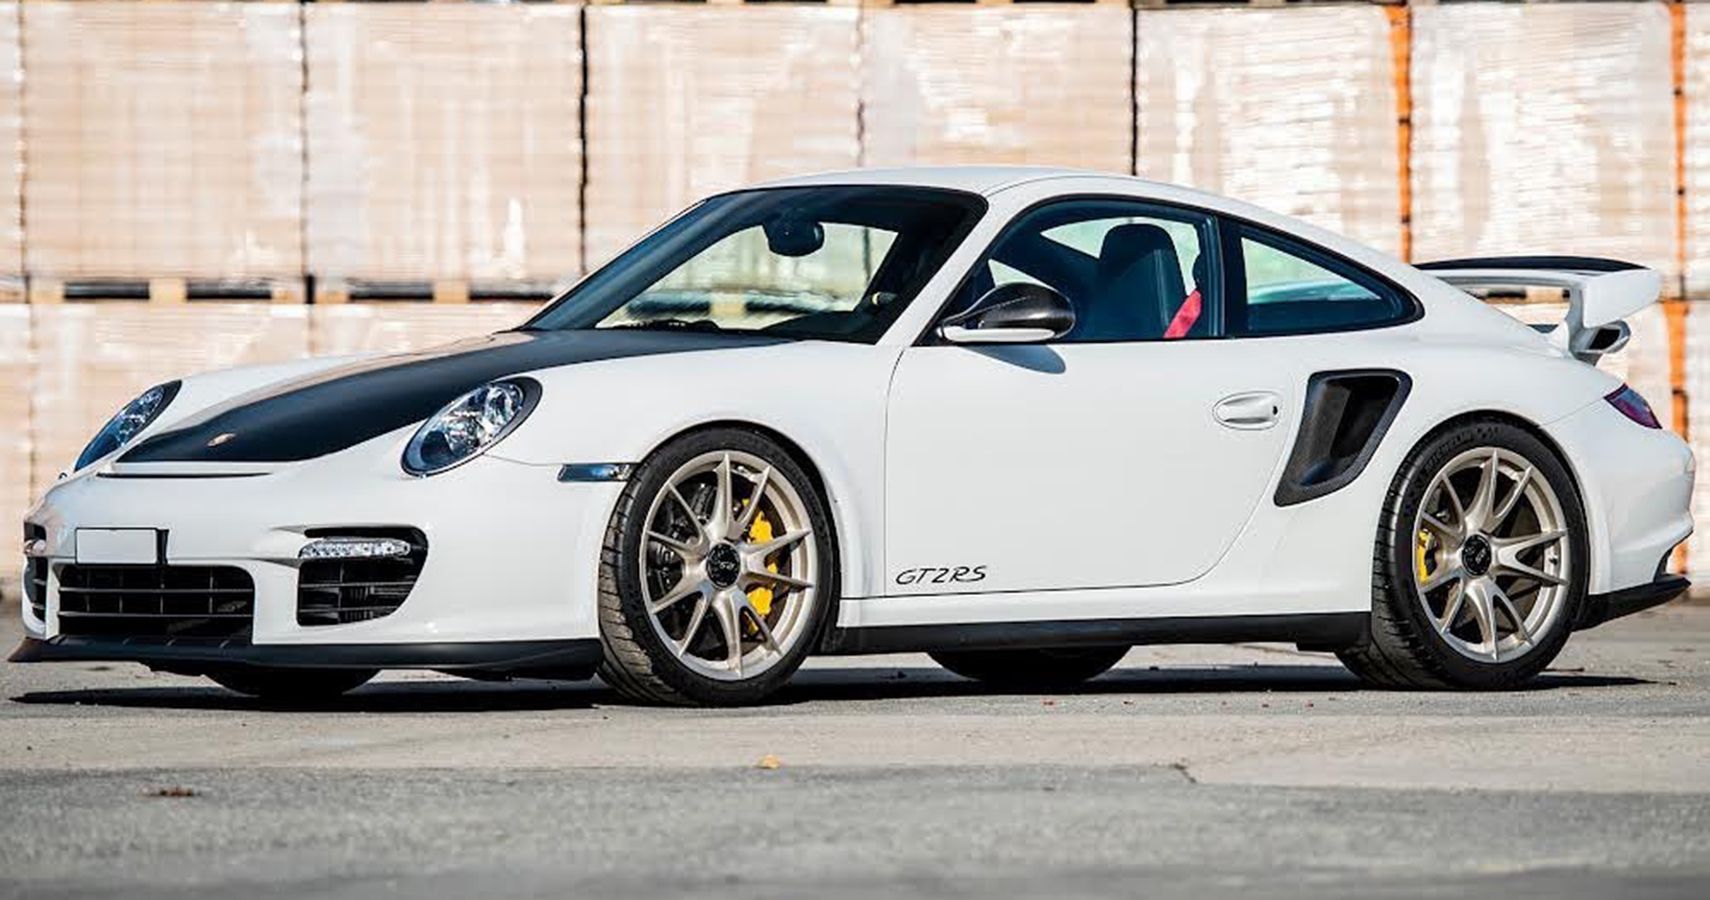 This Limited Edition 2011 Porsche GT2 RS Is A Rare And Stunning Find